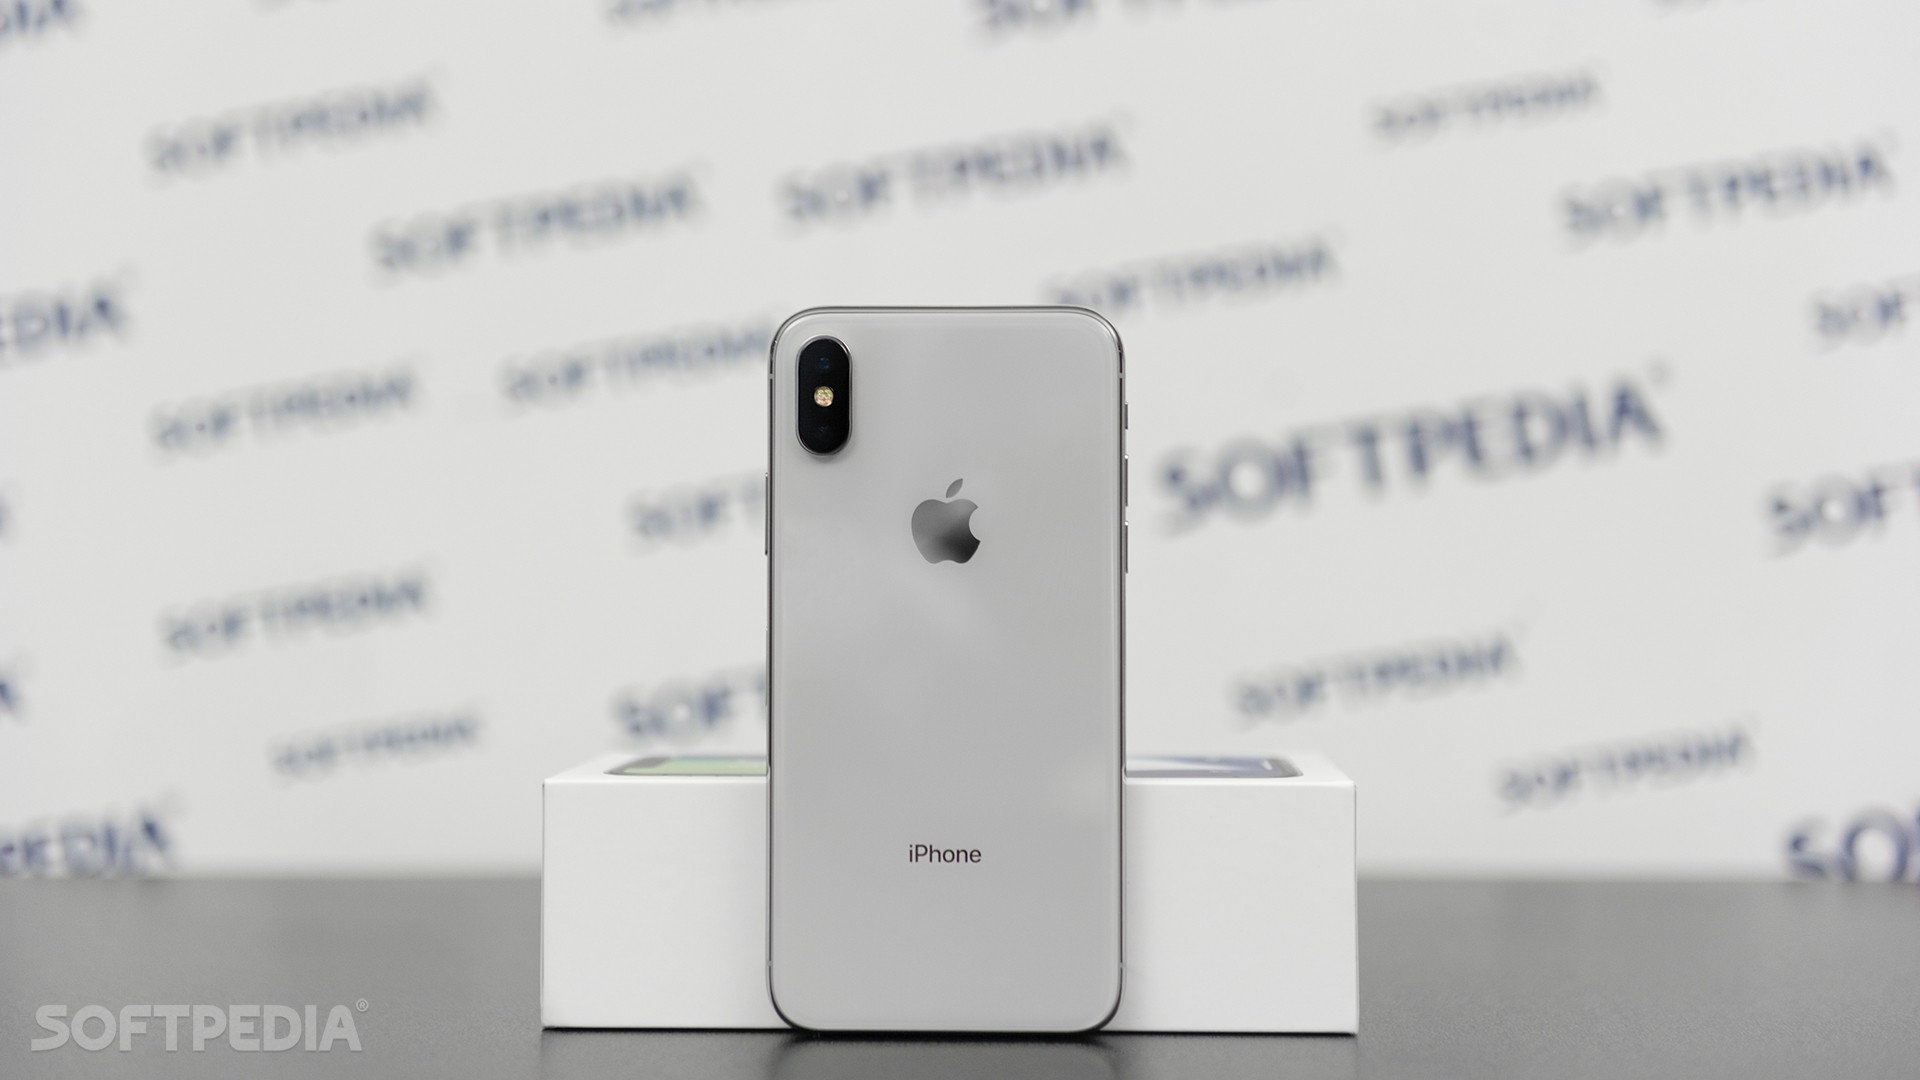 Apple suppliers ready for iphone sales boom in late 2019 526826 2